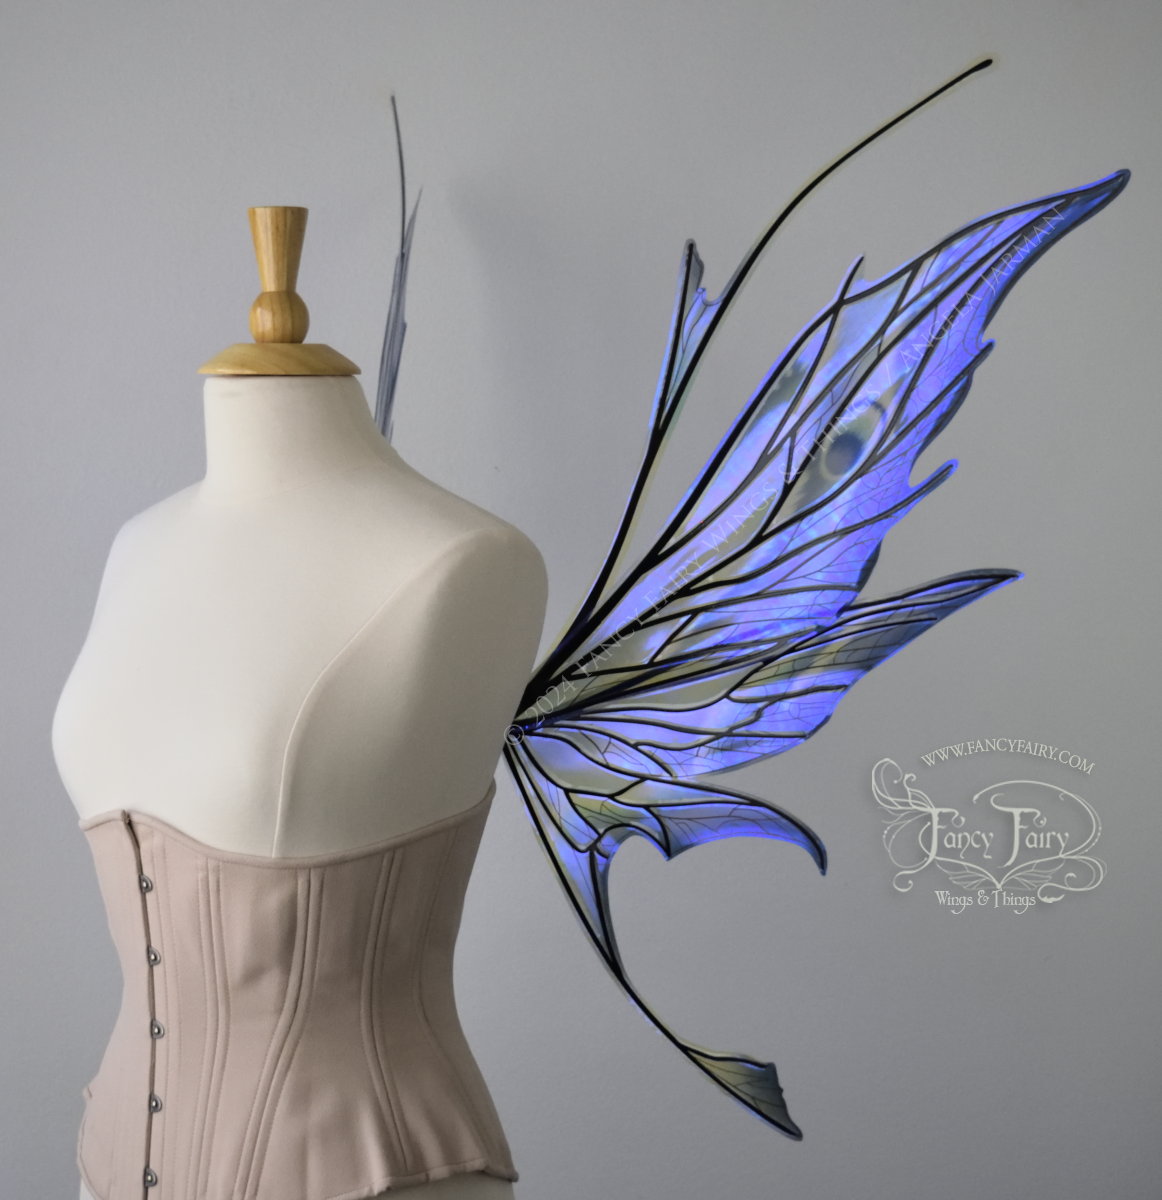 Right side view of large spikey blue painted iridescent fairy wings with antennae along the top & black detailed veins, displayed on dress form. 